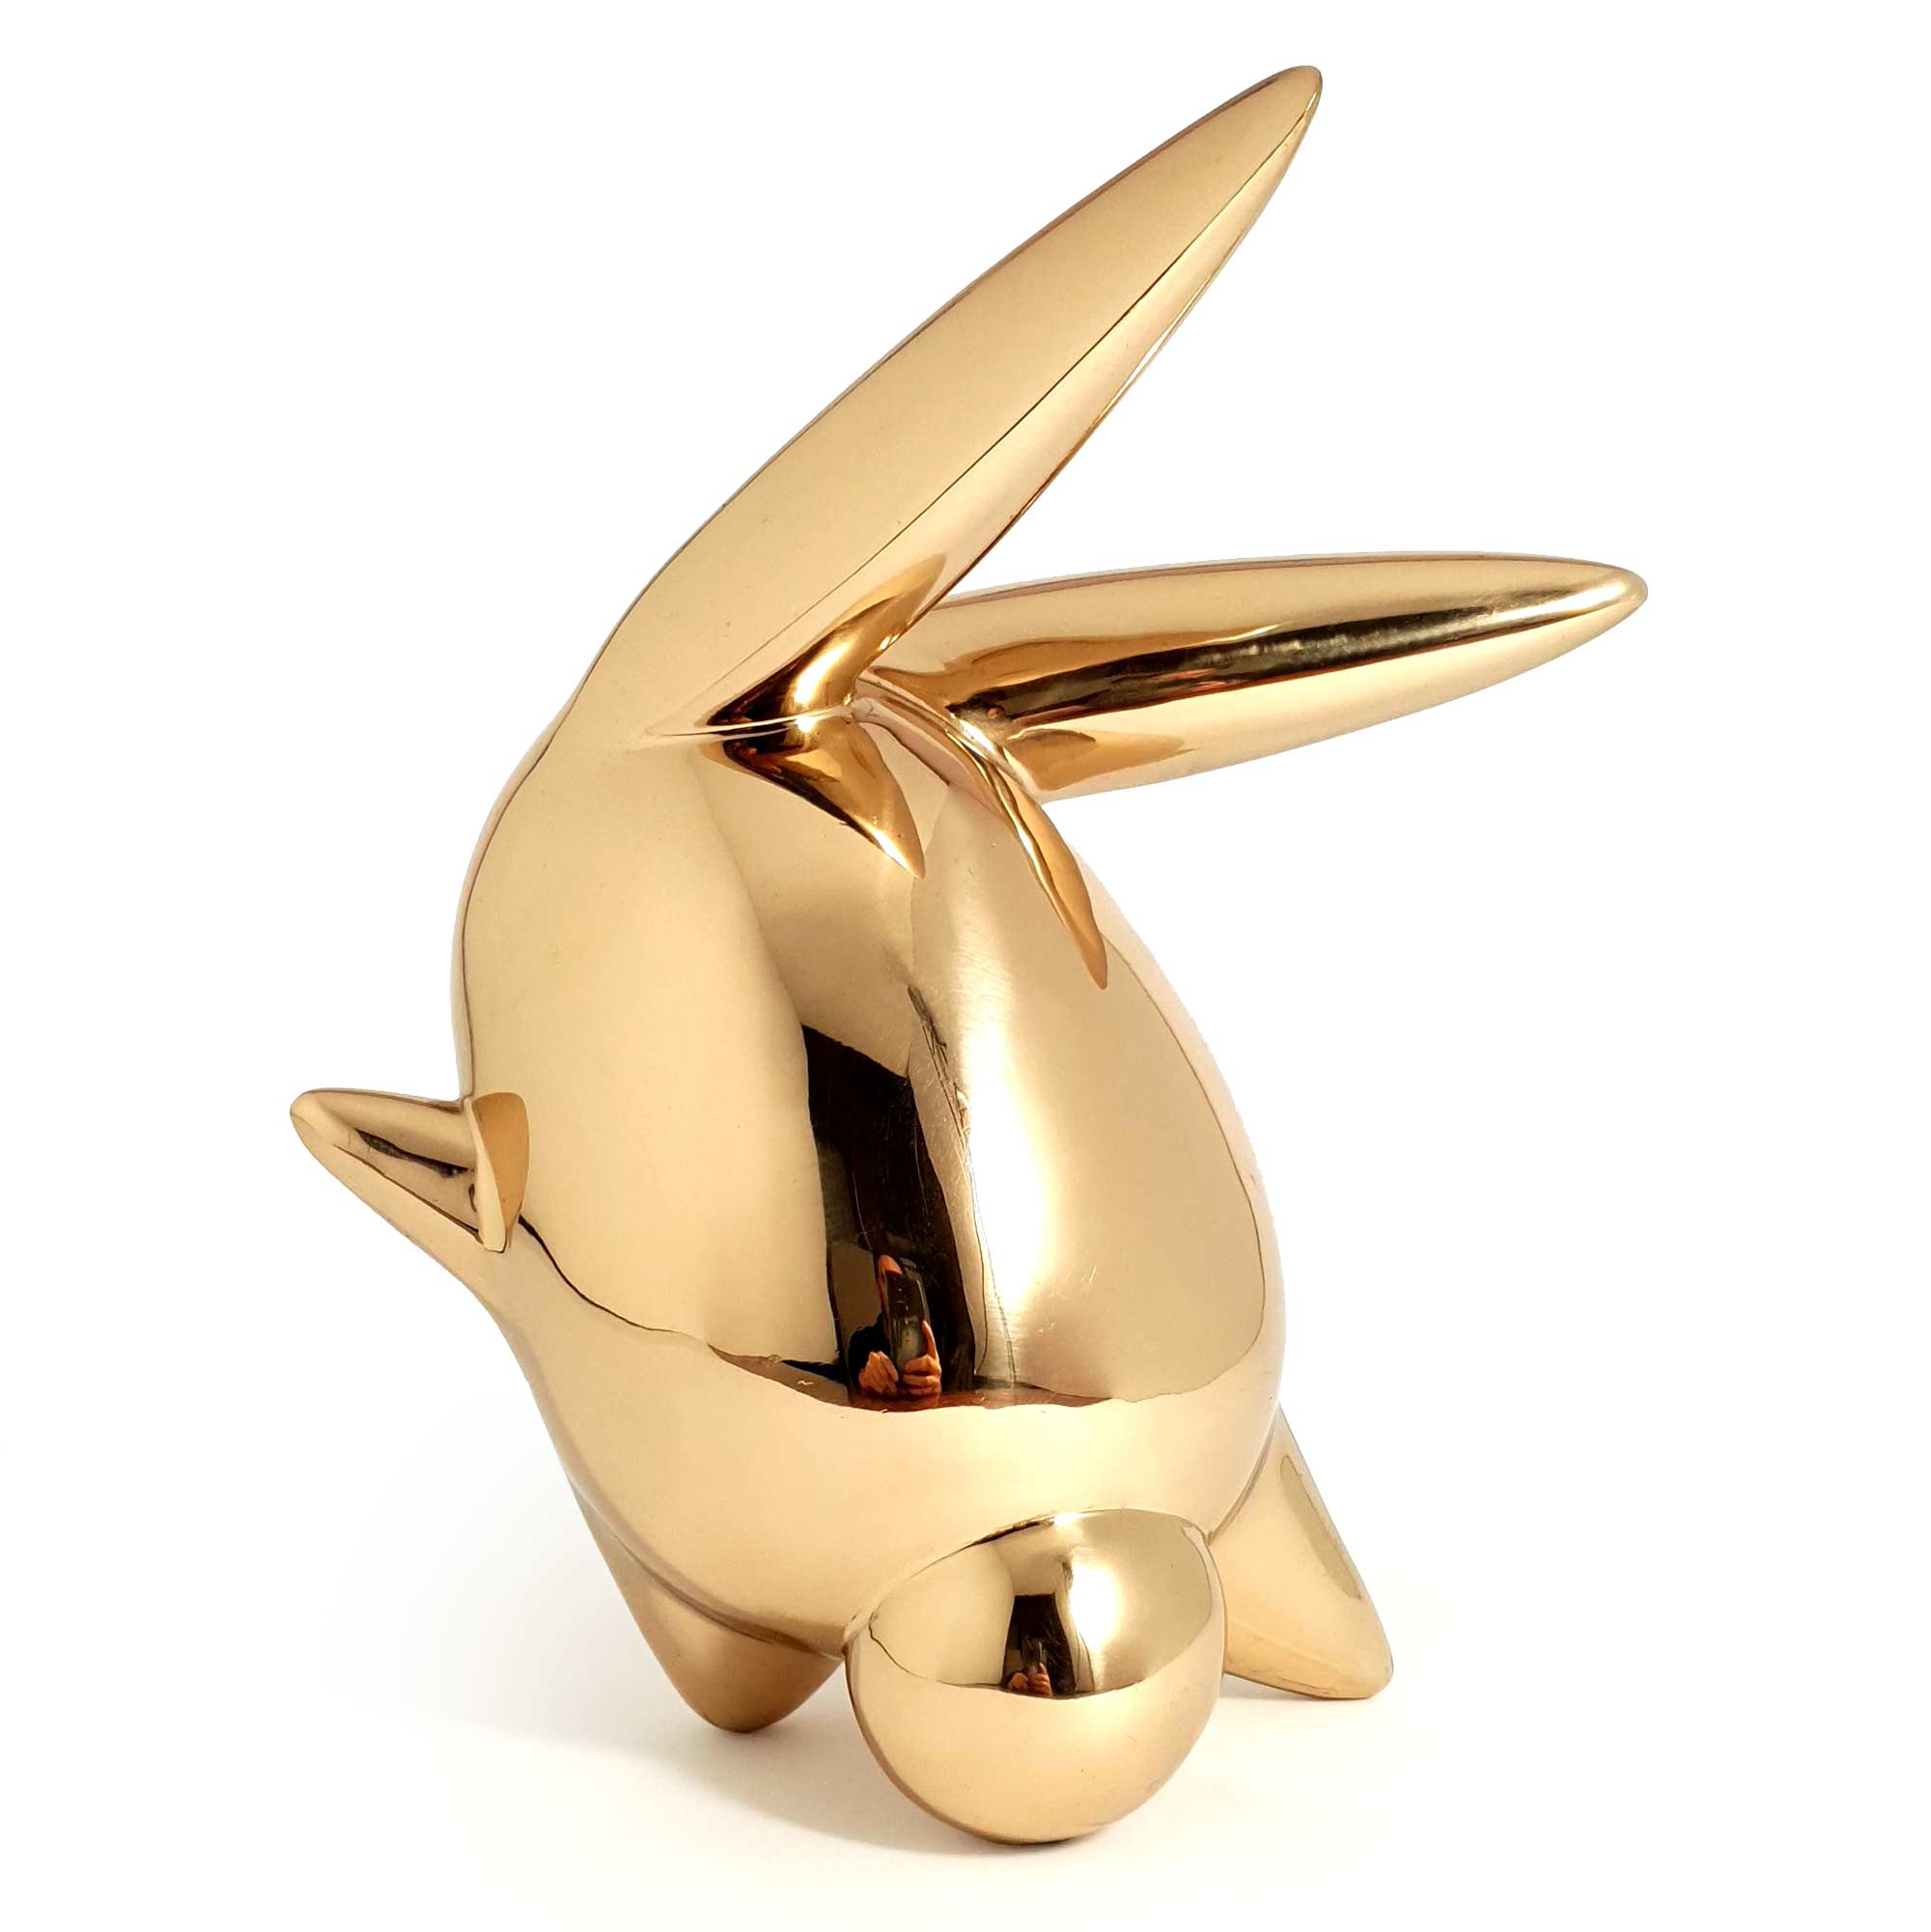 Flight or Fight, bunny rabbit sculpture, gold Mirror Polished Stainless Steel Sculpture, by artist Ferdi B Dick, back view